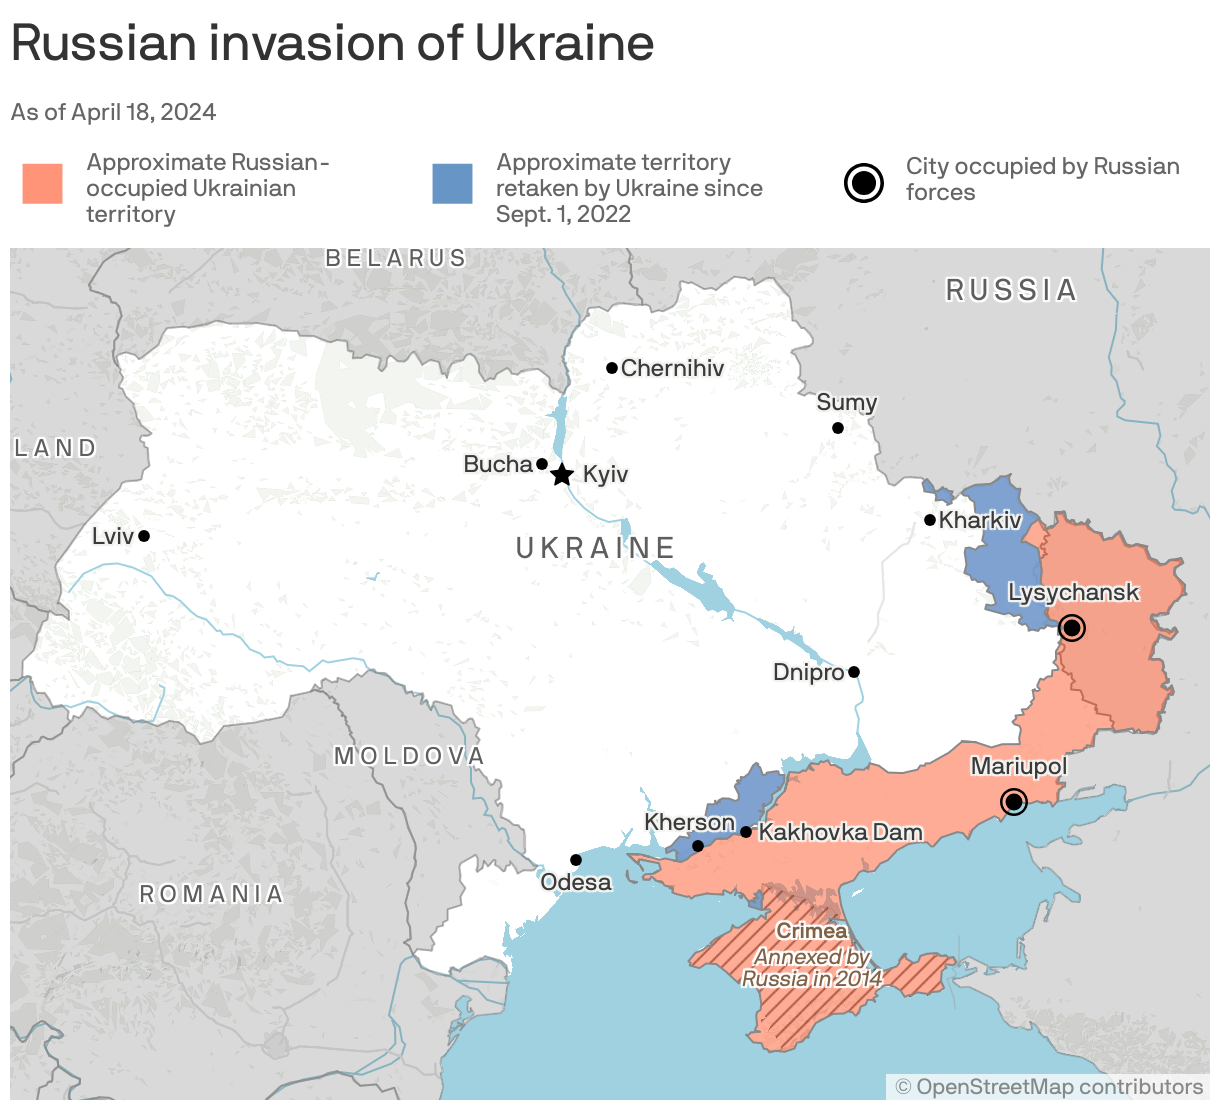 Russian invasion of Ukraine, as of April 26